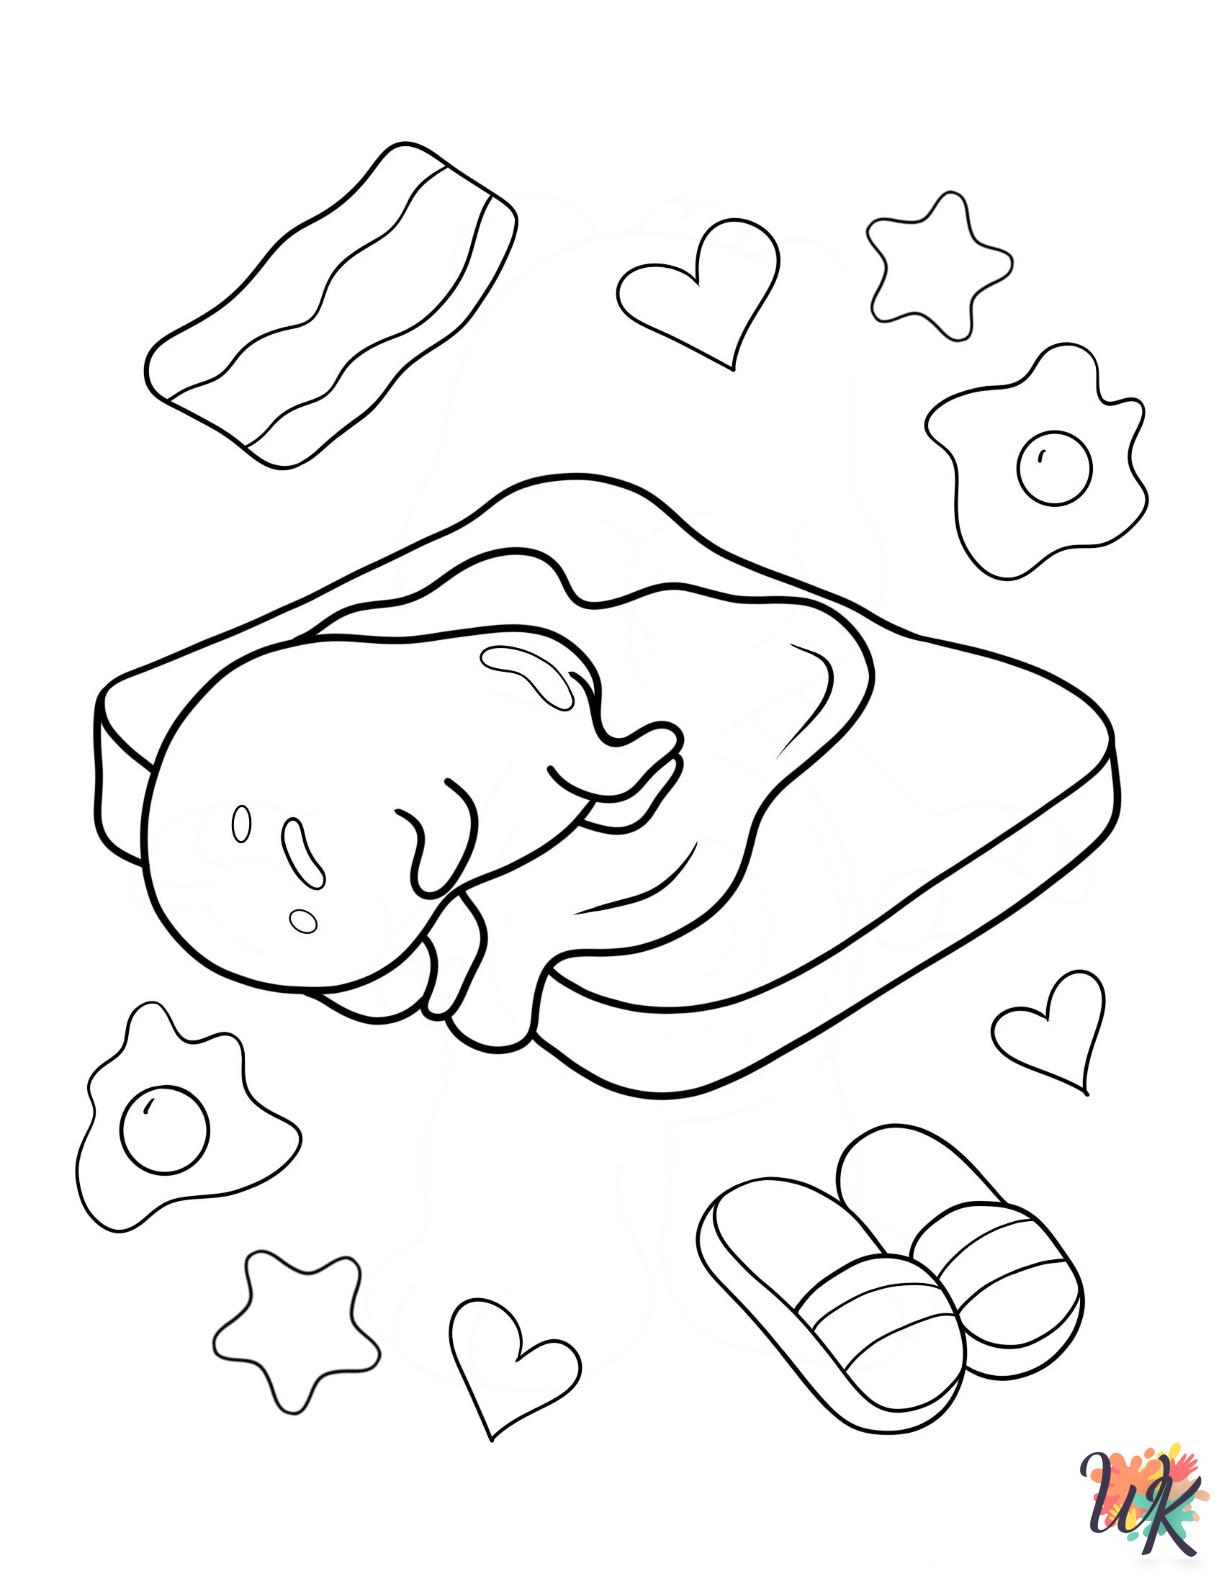 free Gudetama coloring pages for adults